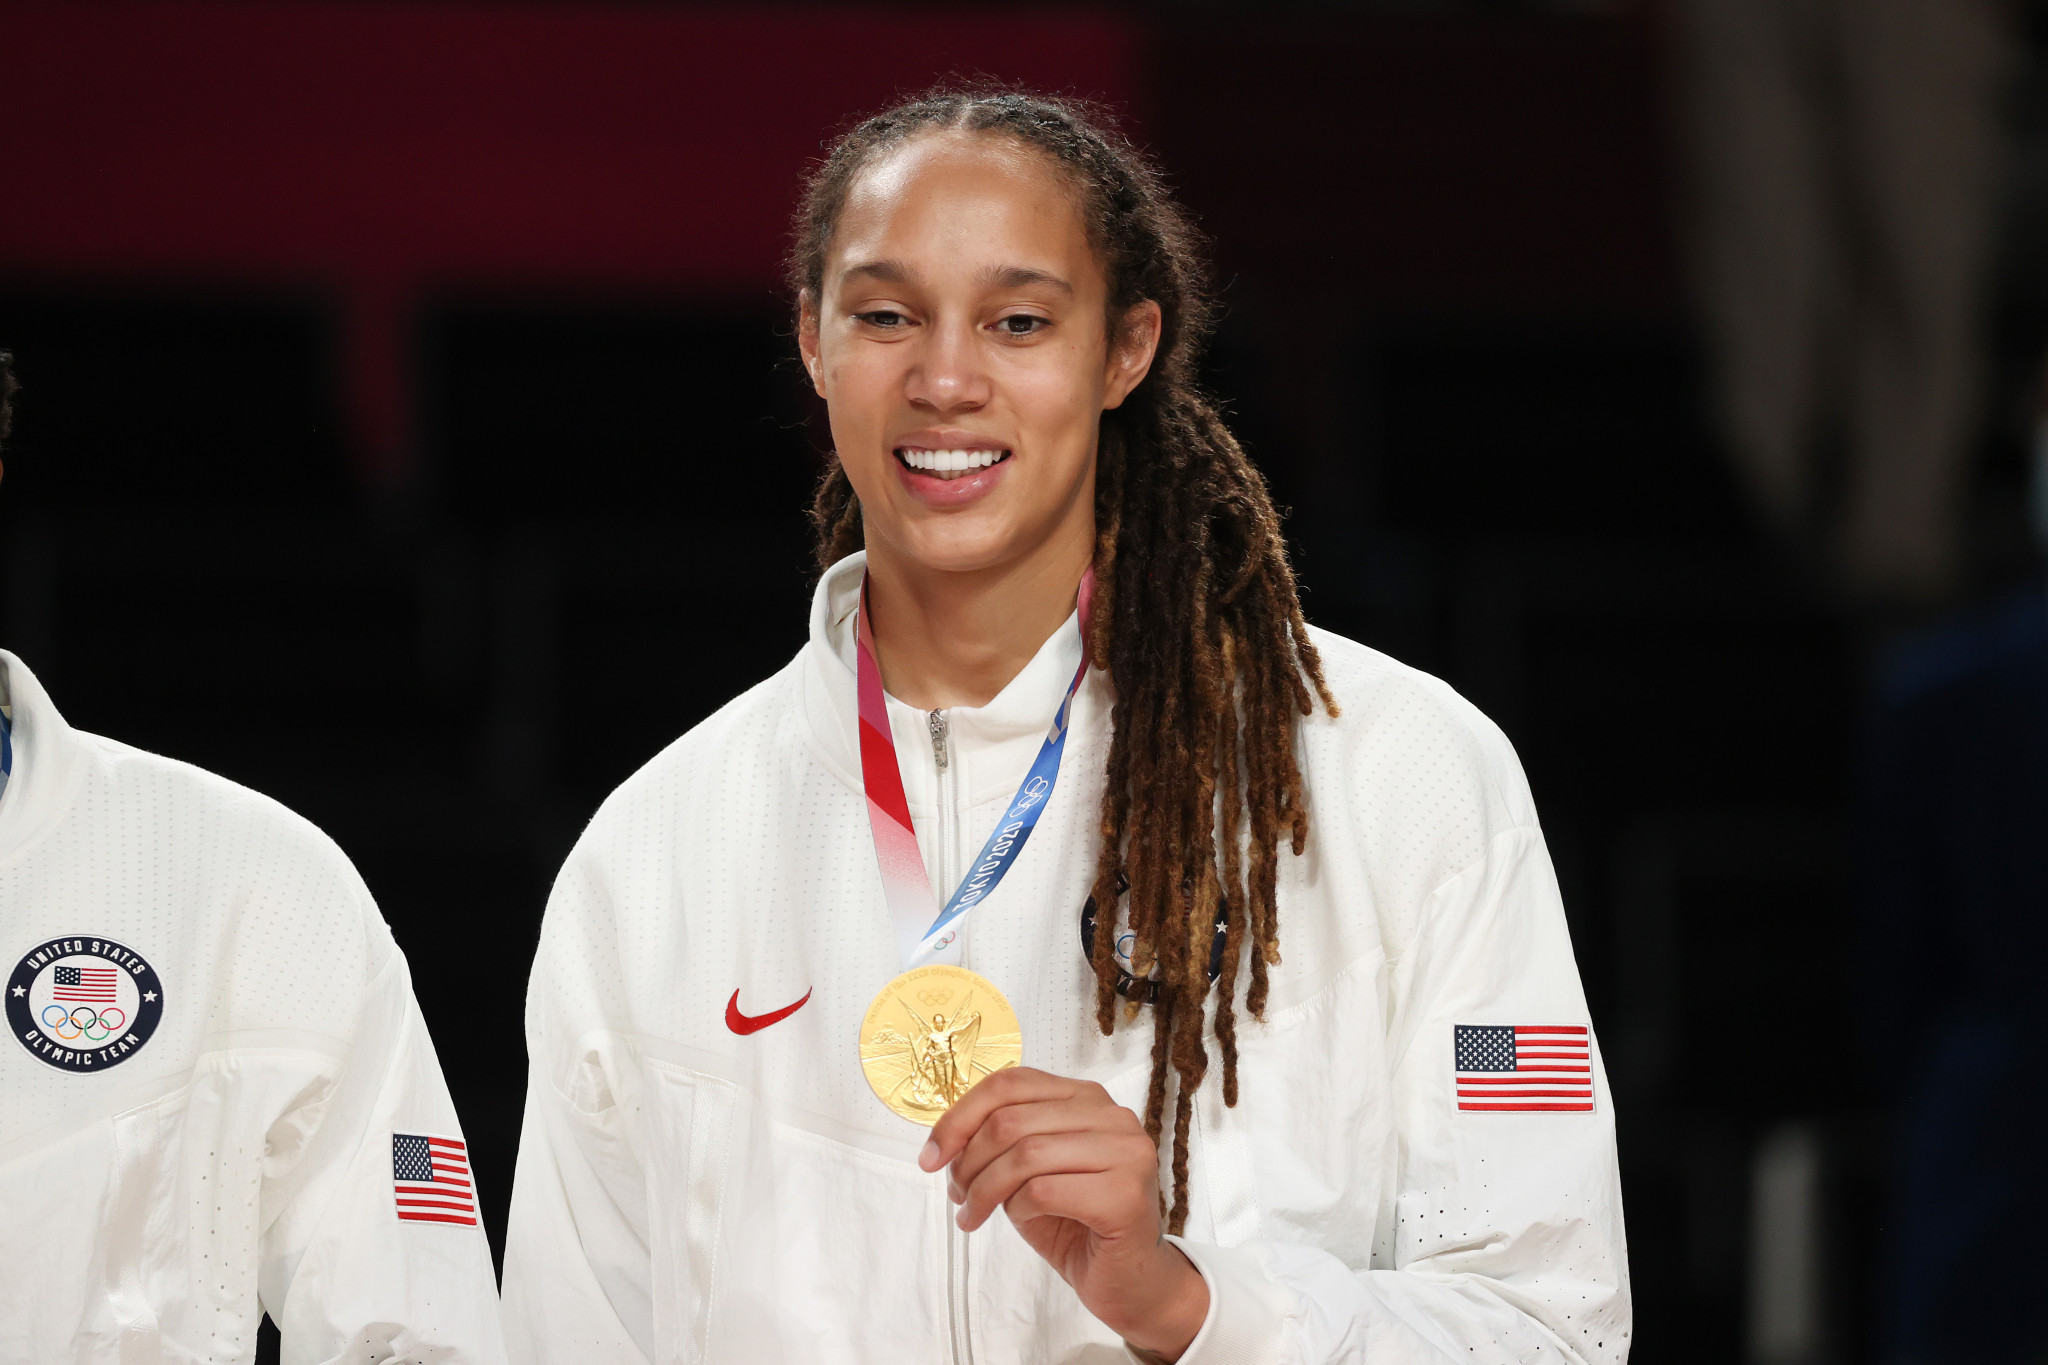 Griner vows she will only play abroad at Olympics after detainment in Russia